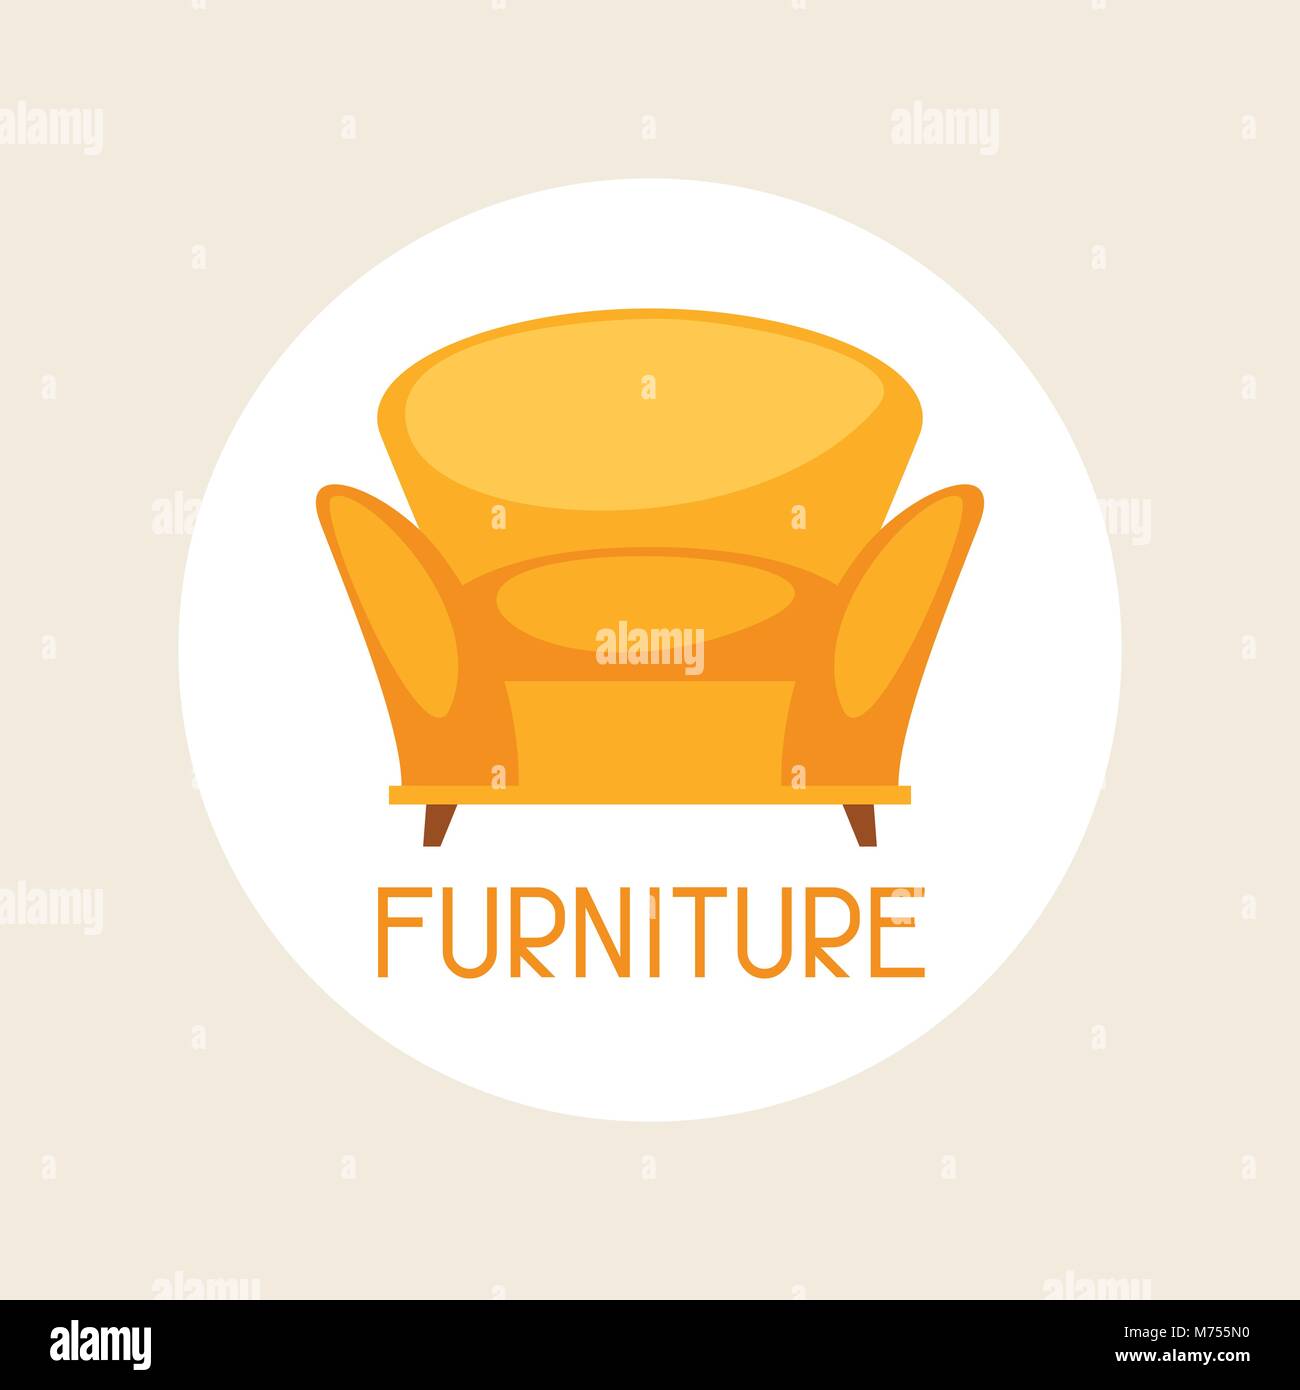 Interior illustration with furniture in retro style Stock Vector